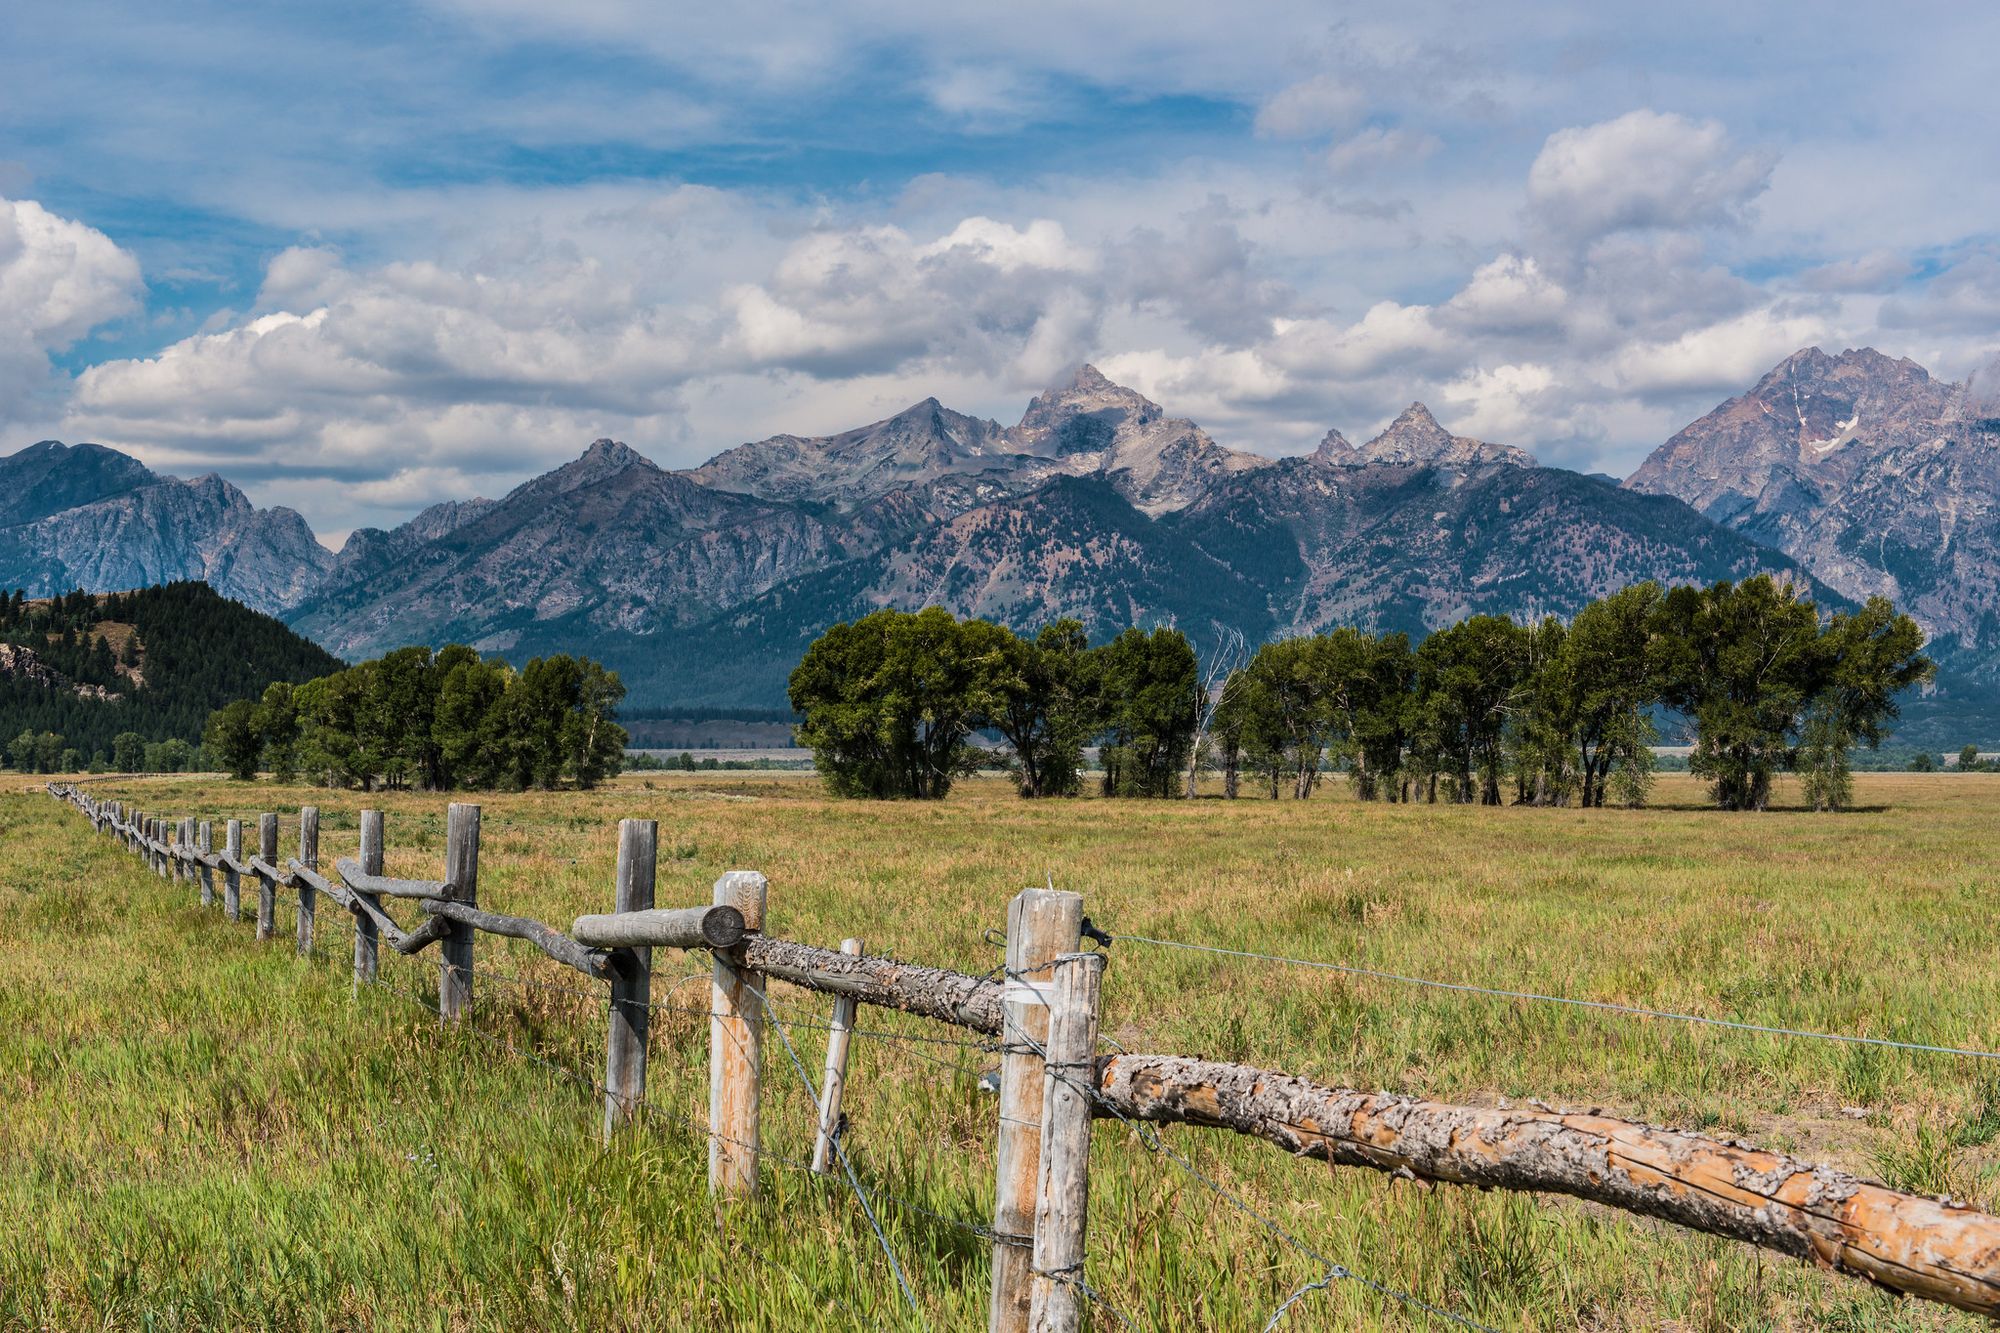 Foreground: a wood and wire fence in a grassy area. Background: a row of trees and some rocky mountains.